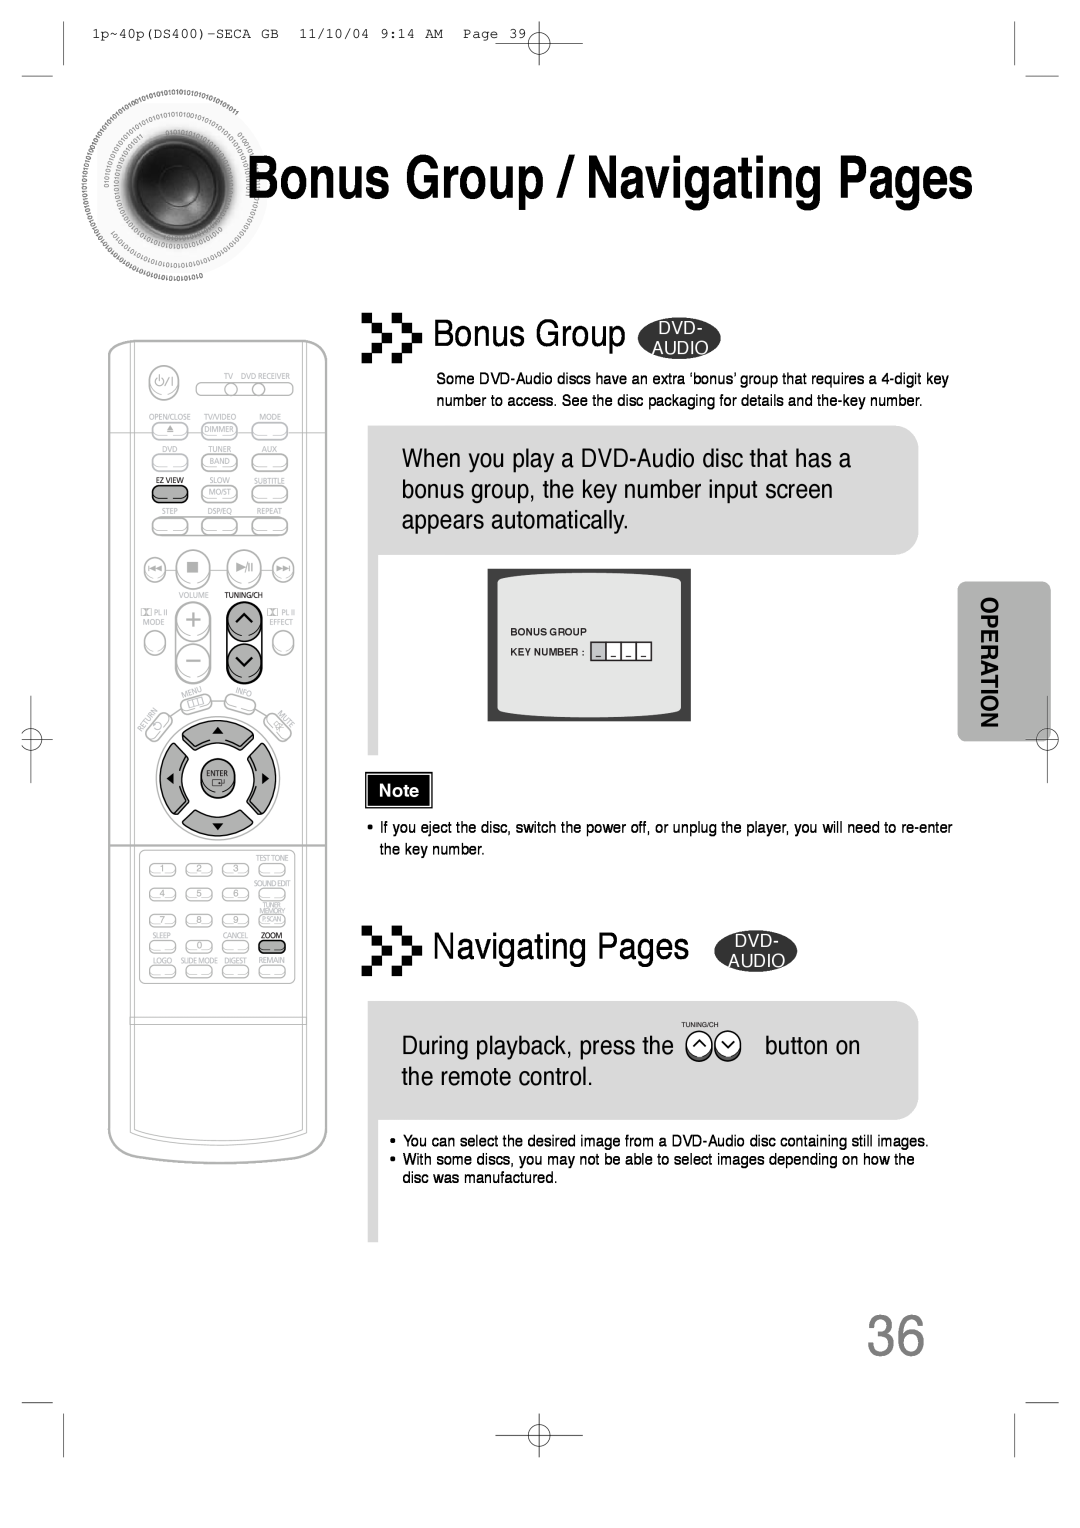 Samsung HT-DS400 Bonus Group DVD, BonusGroup / Navigating Pages, During playback, press the, the remote control, Audio 